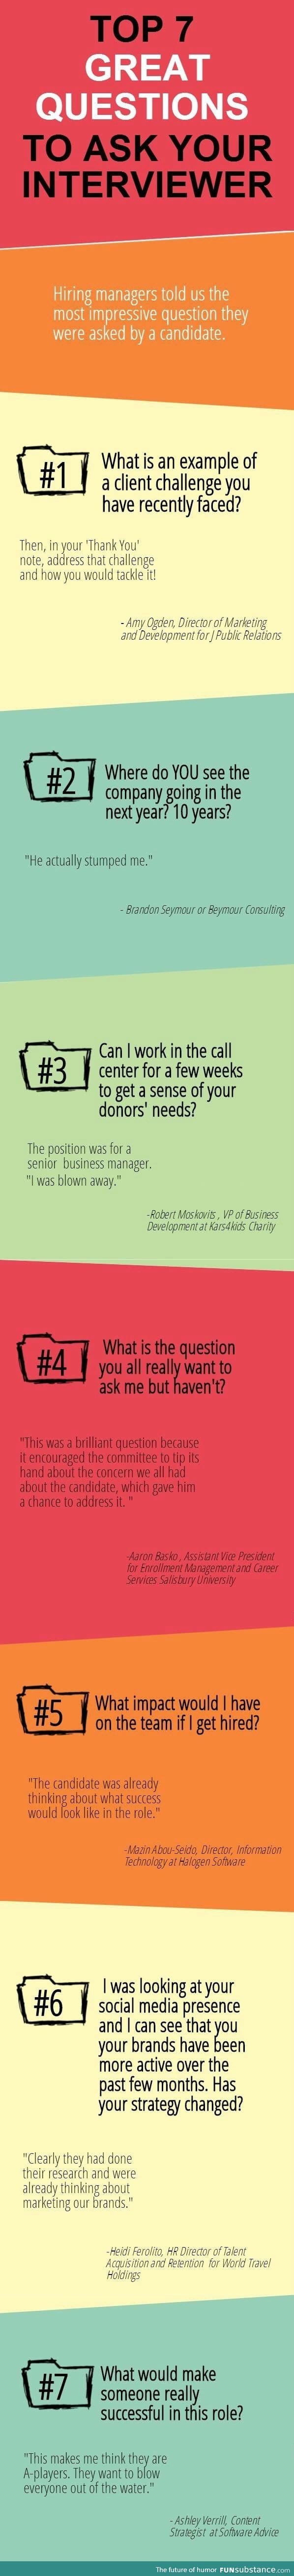 Top 7 great questions to ask your Interviwer